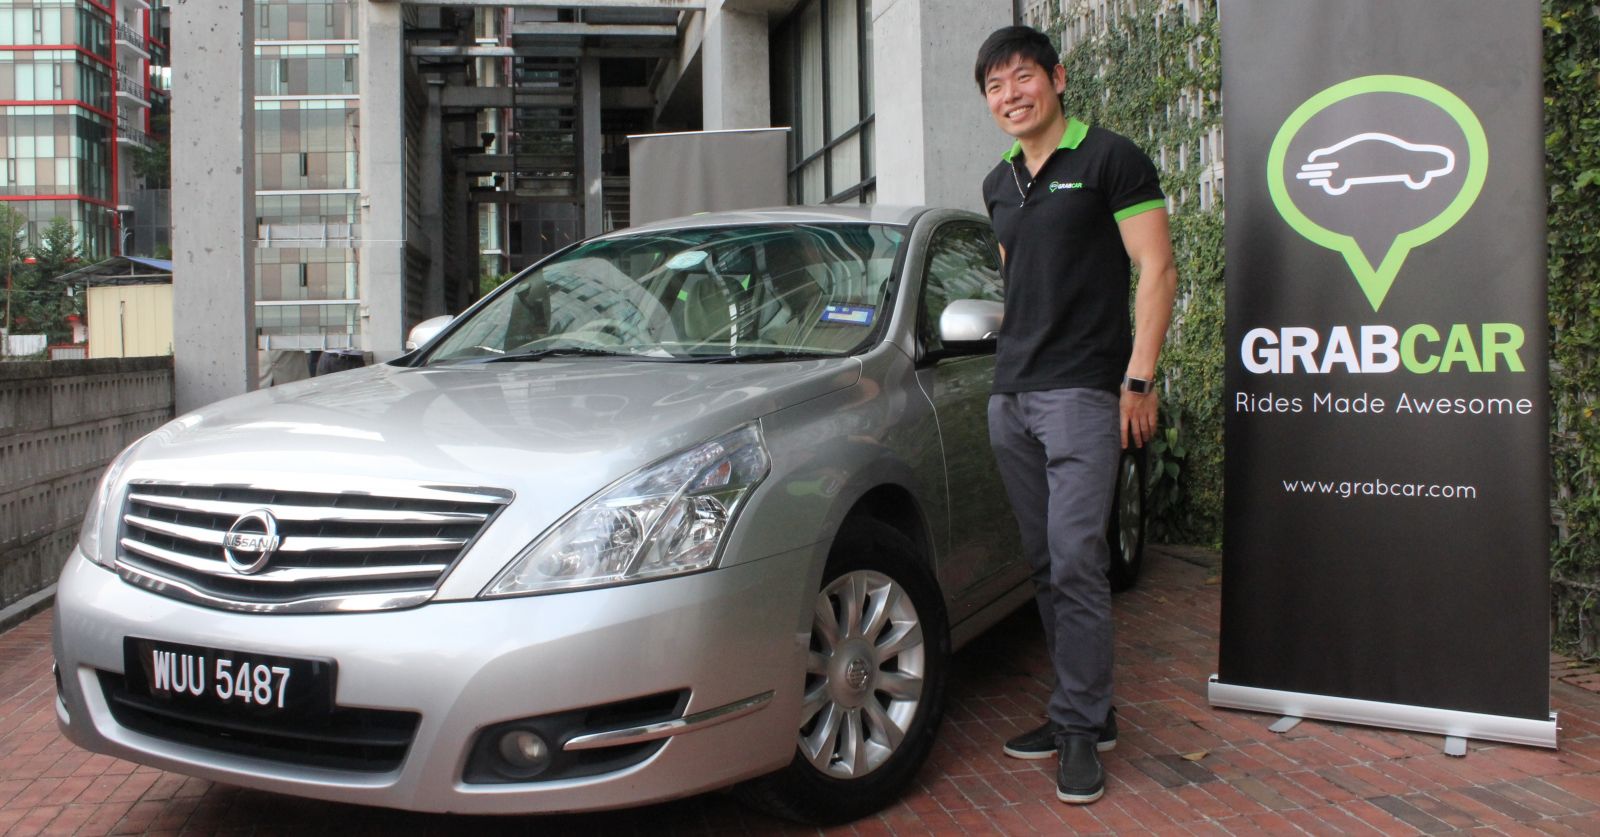 GrabTaxi founder Anthony Tan posing with a GrabCar banner, a new service GrabTaxi launched in 2013.